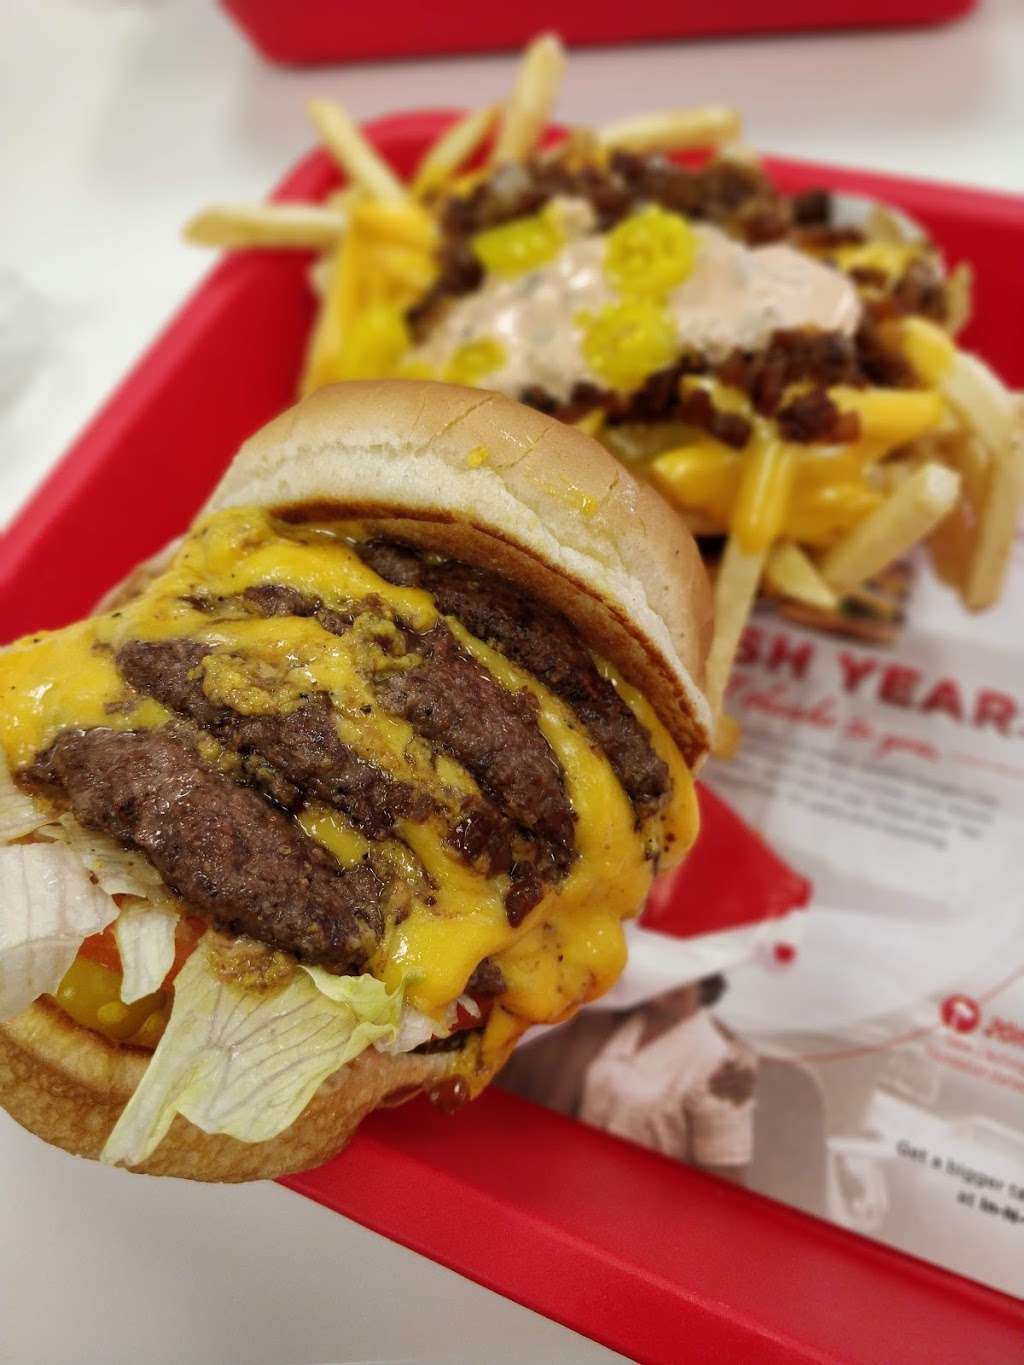 In-N-Out Burger | 21620 Valley Blvd, Walnut, CA 91789 | Phone: (800) 786-1000